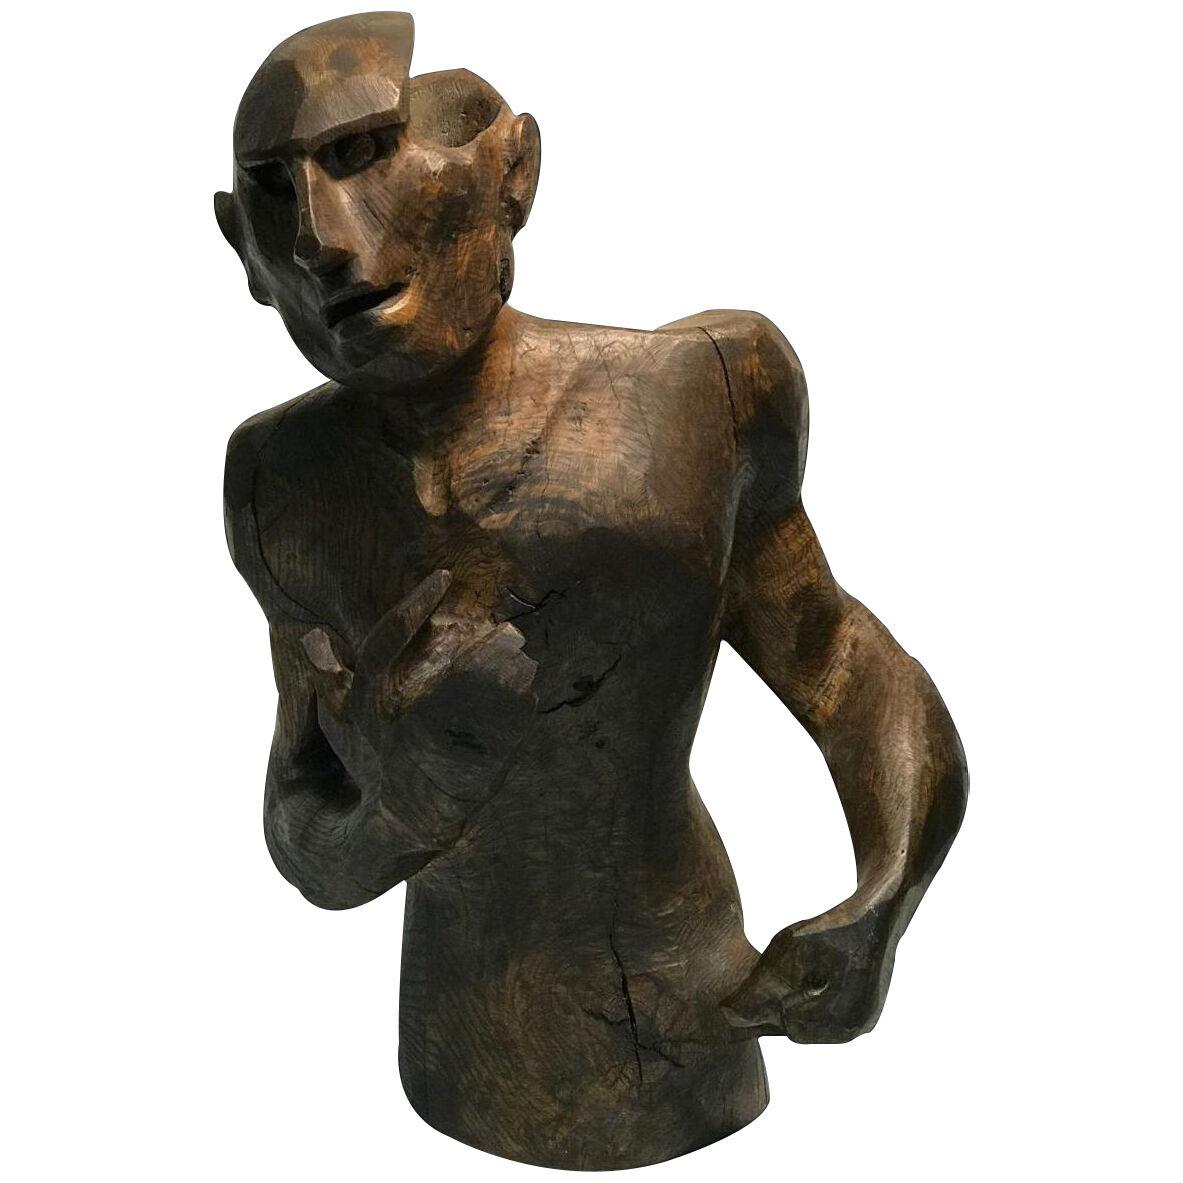 1980s Sycamore Wood Sculpture of a Man's Figure	